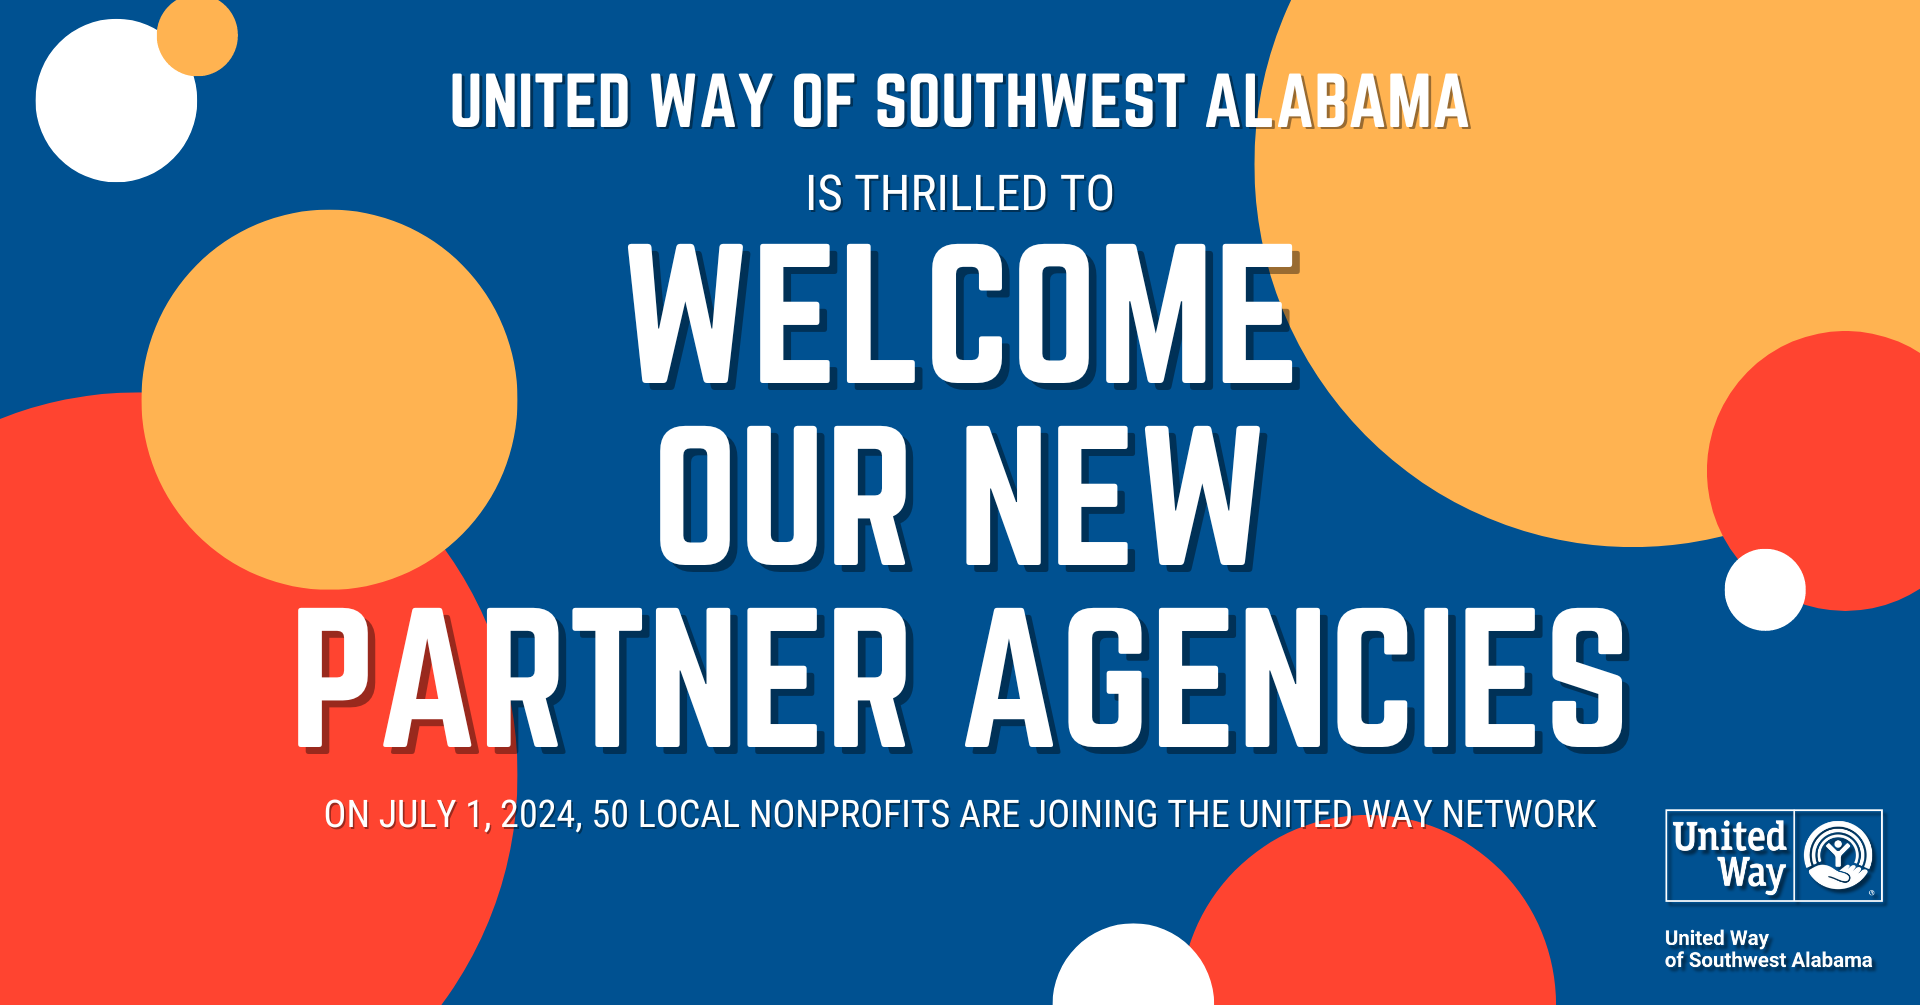 United Way of Southwest Alabama is thrilled to welcome our new partner agencies. On July 1, 2024, 50 local nonprofits are joining the United Way Network.